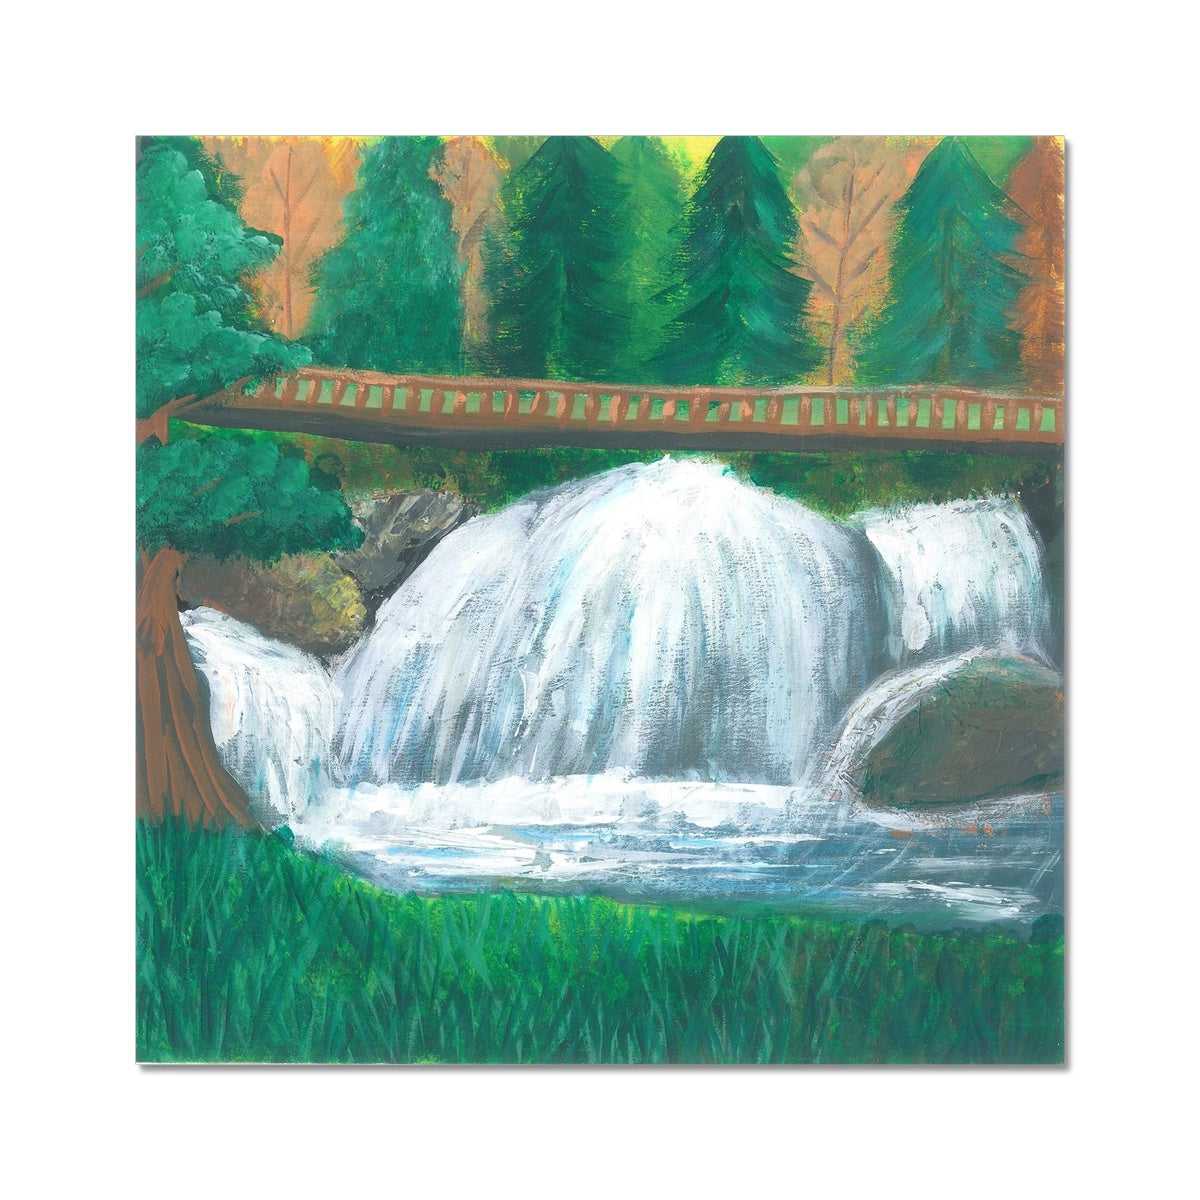 Meadow Atmosphere - Forest Vigor with Rushing Waterfall and Verdant Trees Fine Art Print - nature soundscape art - earth.fm